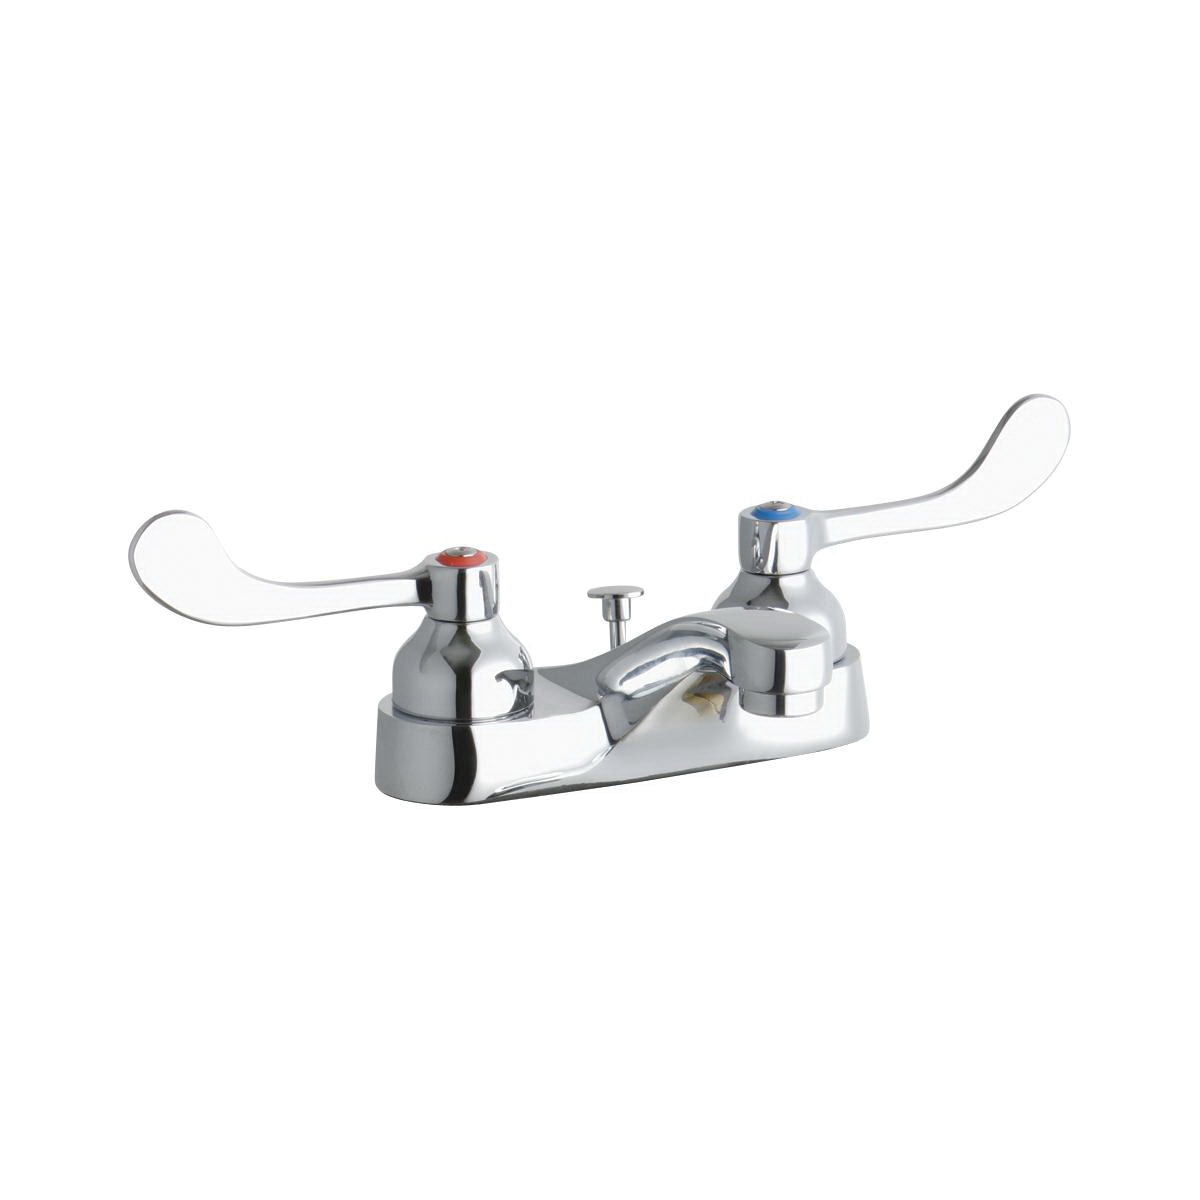 Elkay® LK403T4 Exposed Centerset Bathroom Faucet, Chrome Plated, 2 Handles, Pop-Up Drain, 0.5 gpm